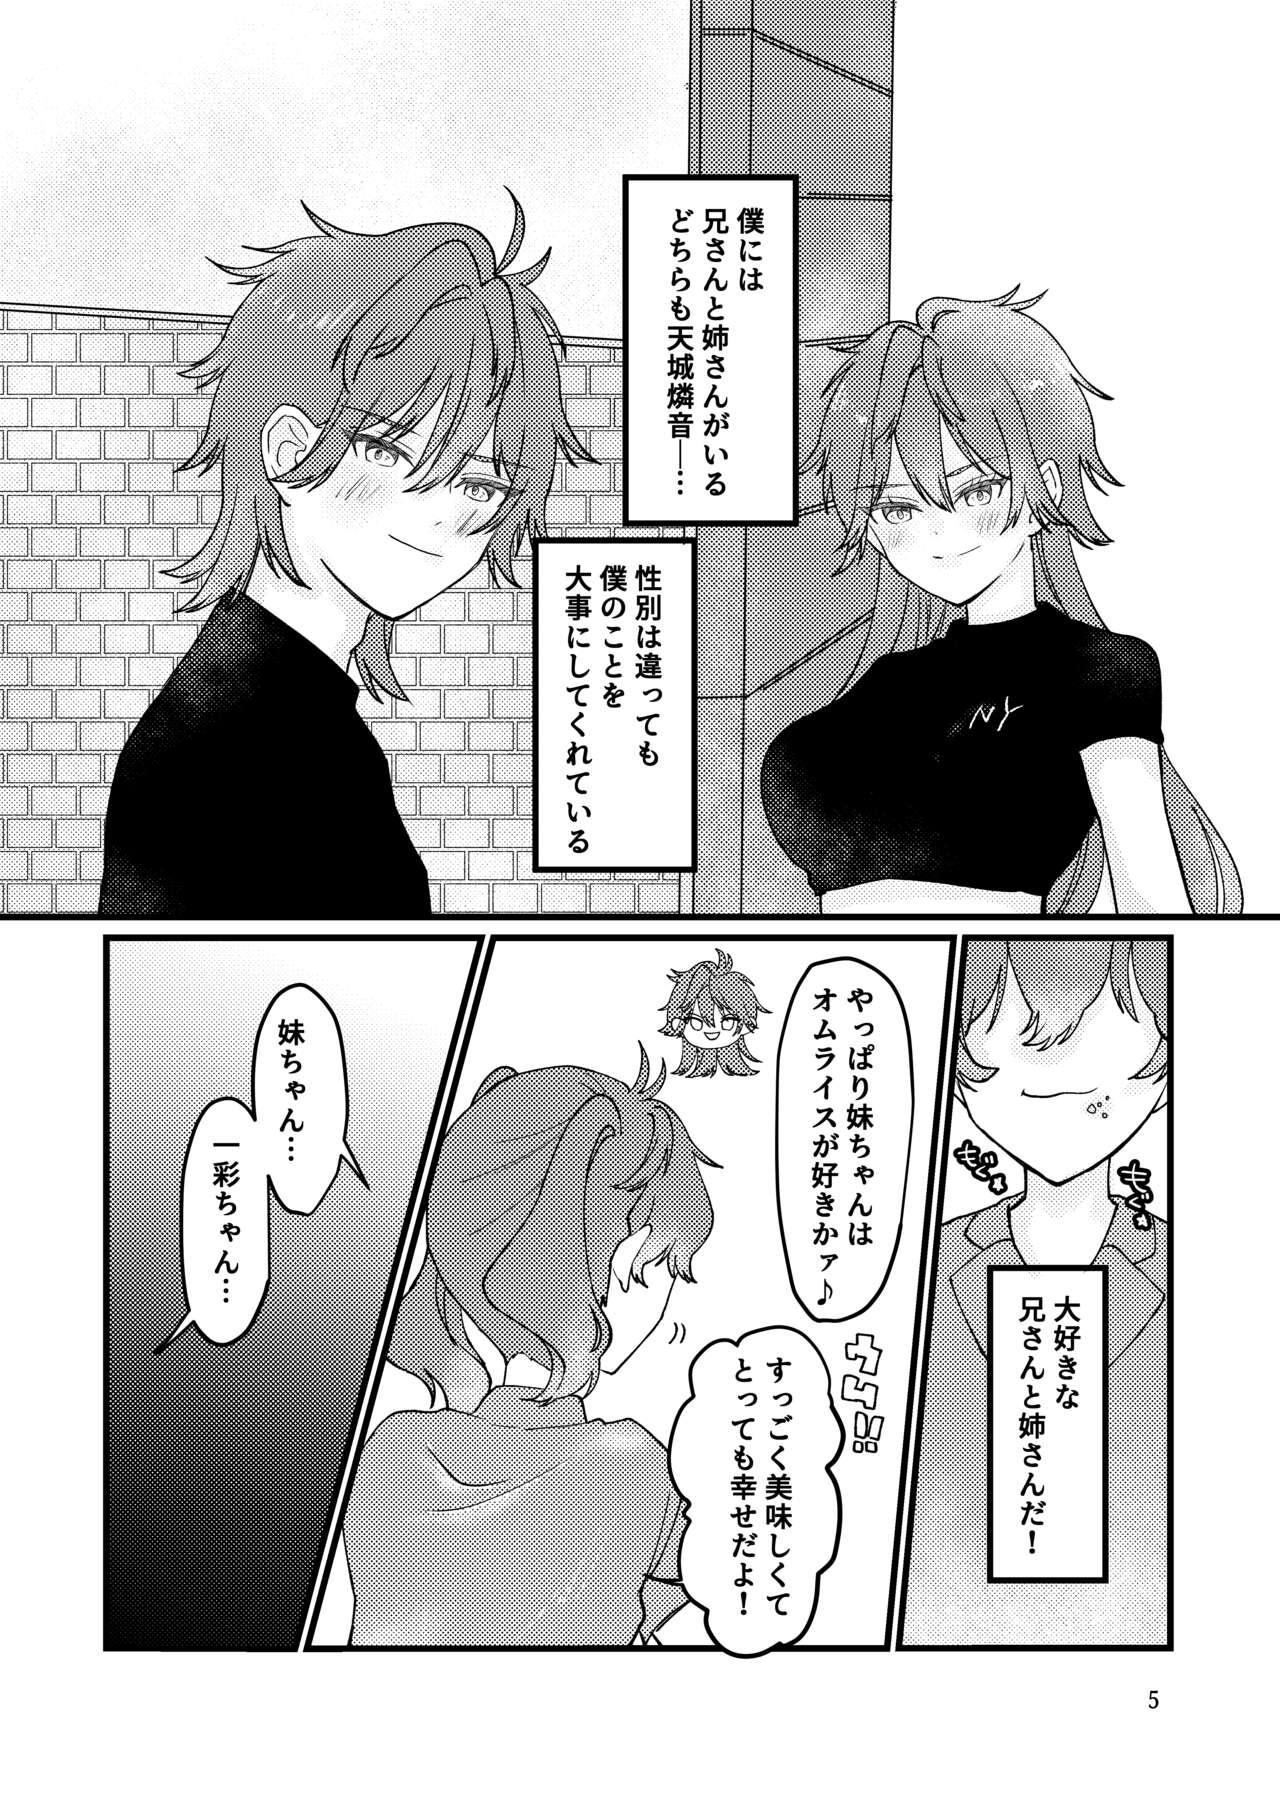 Fucked Hard 燐燐♀一♀ - Ensemble stars Eating Pussy - Page 6